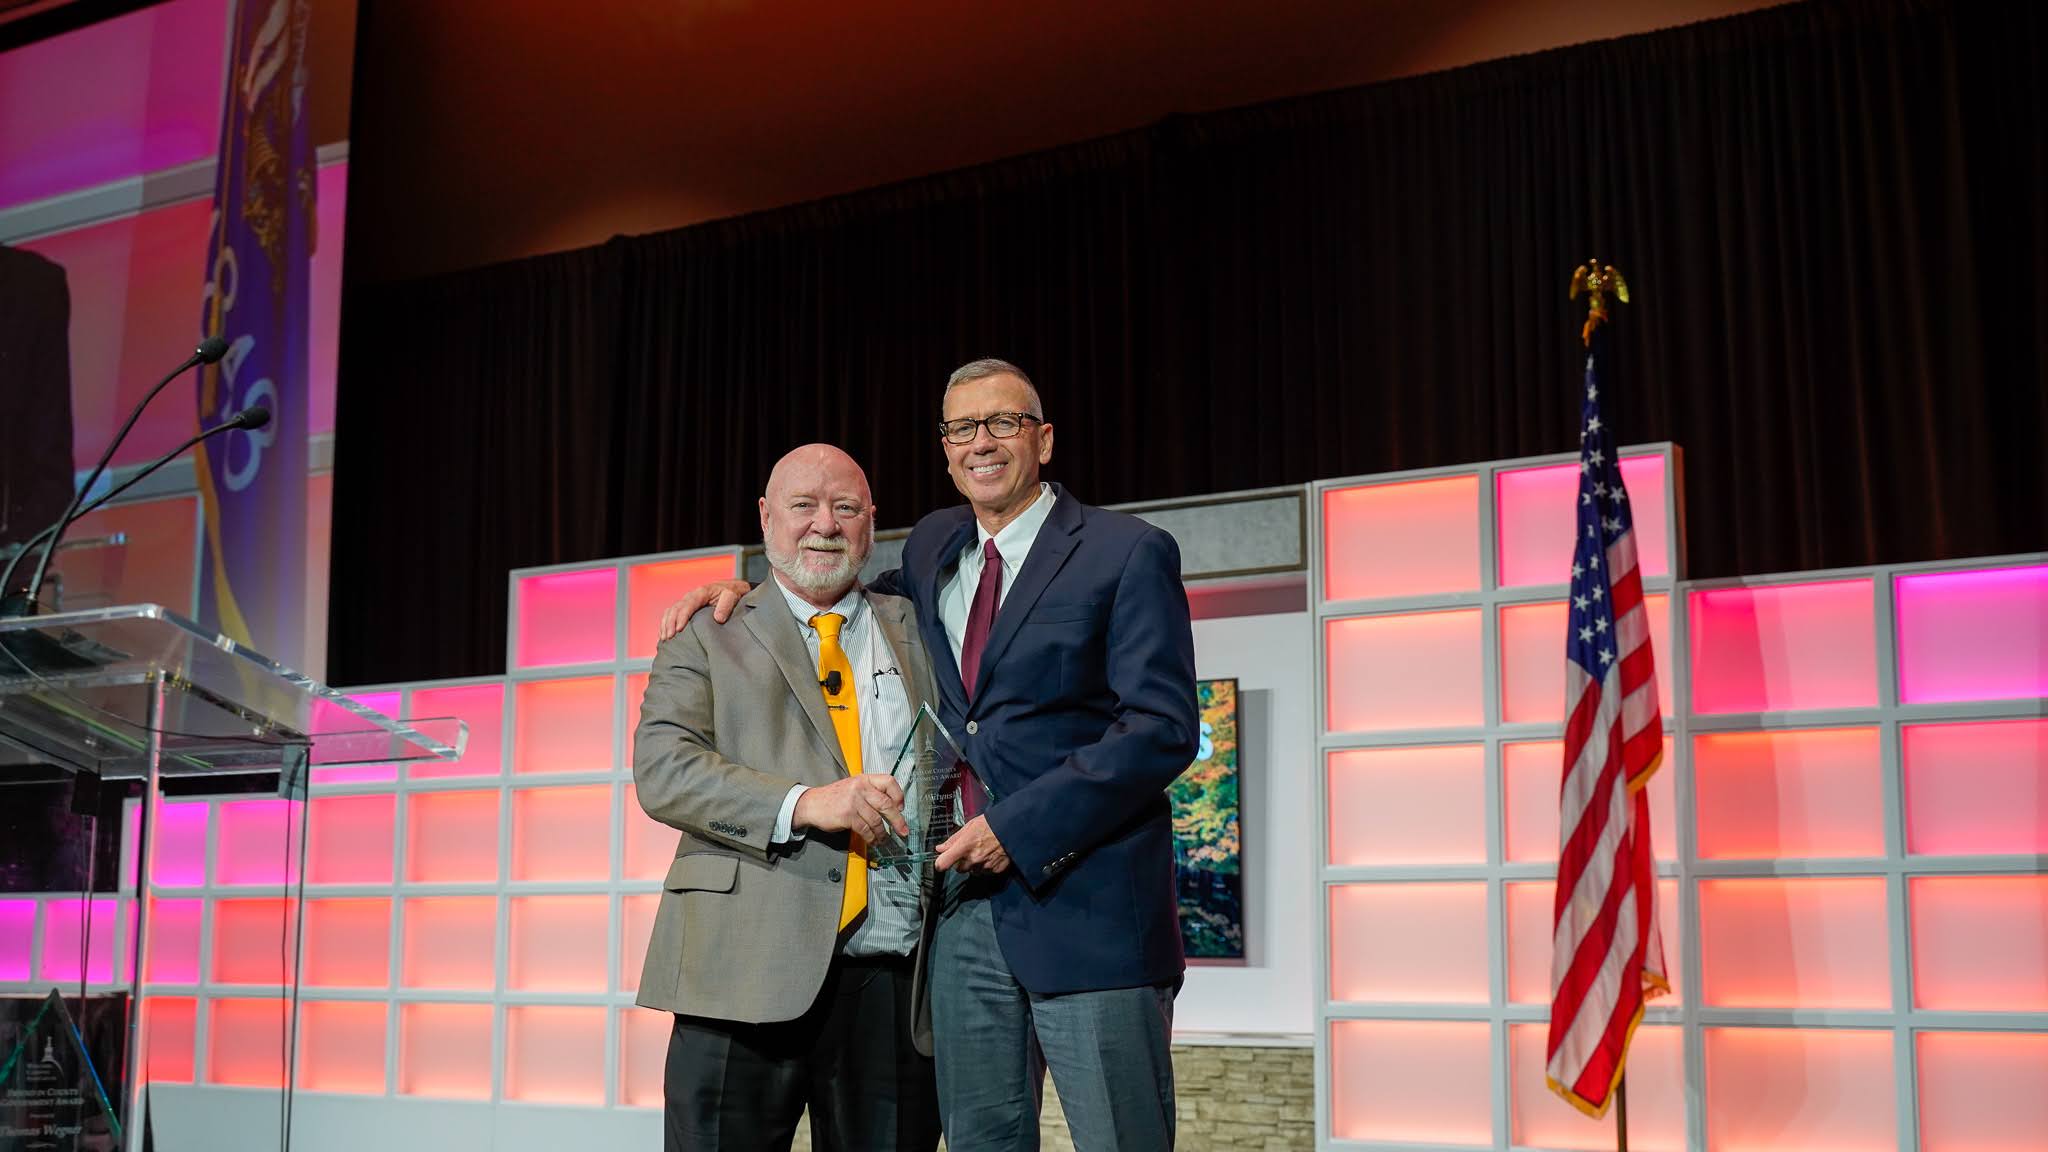 League of Wisconsin Municipalities Witynski Named 2022 WCA Friend of County Government